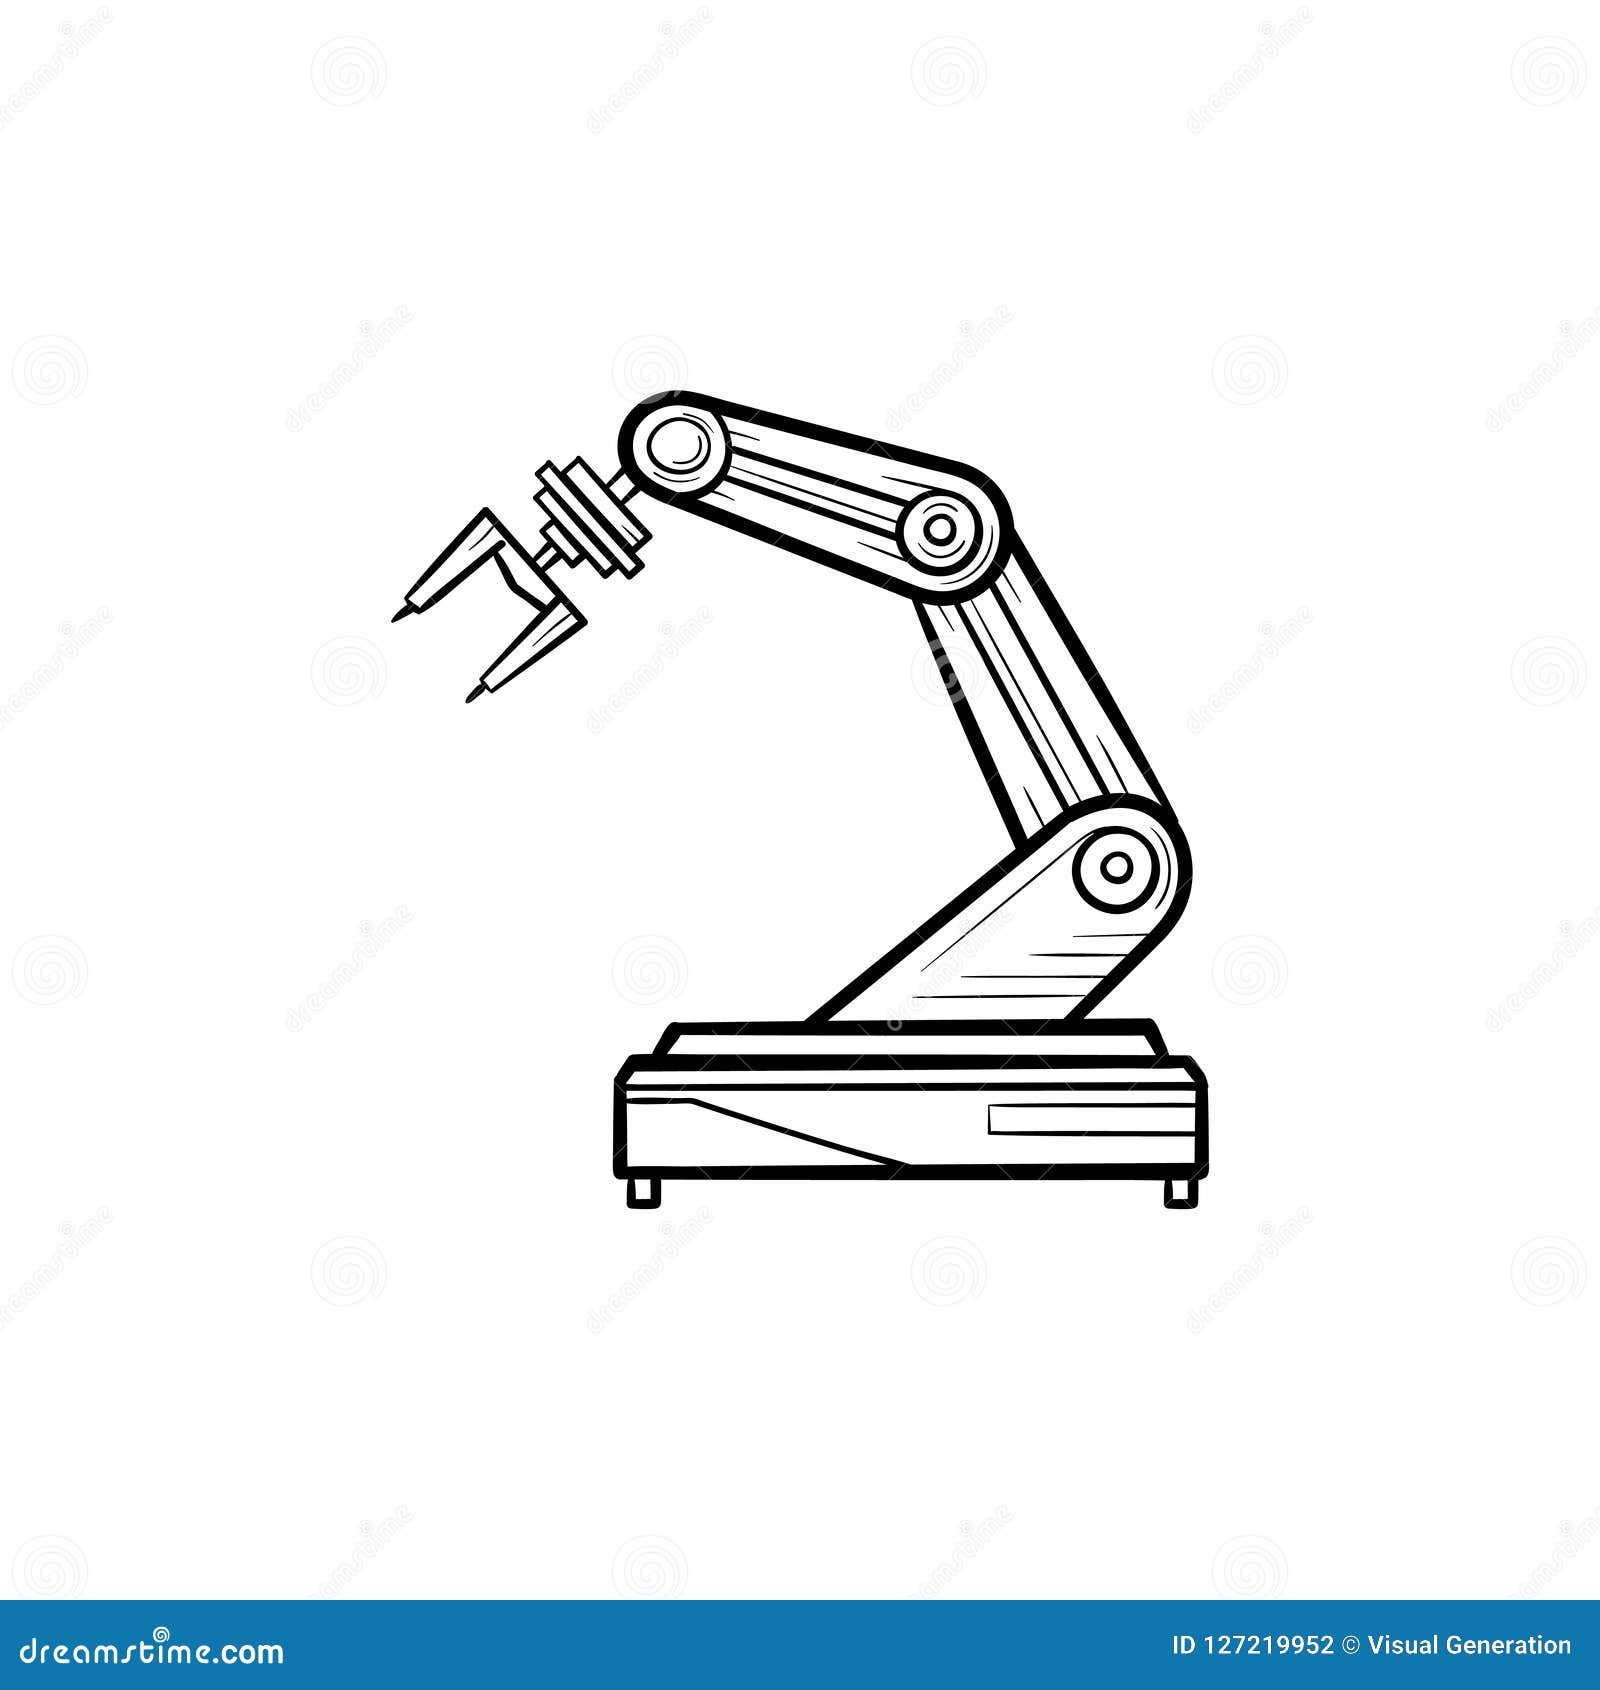 Robotic Arm Hand Drawn Outline Doodle Icon. Stock Vector - Illustration